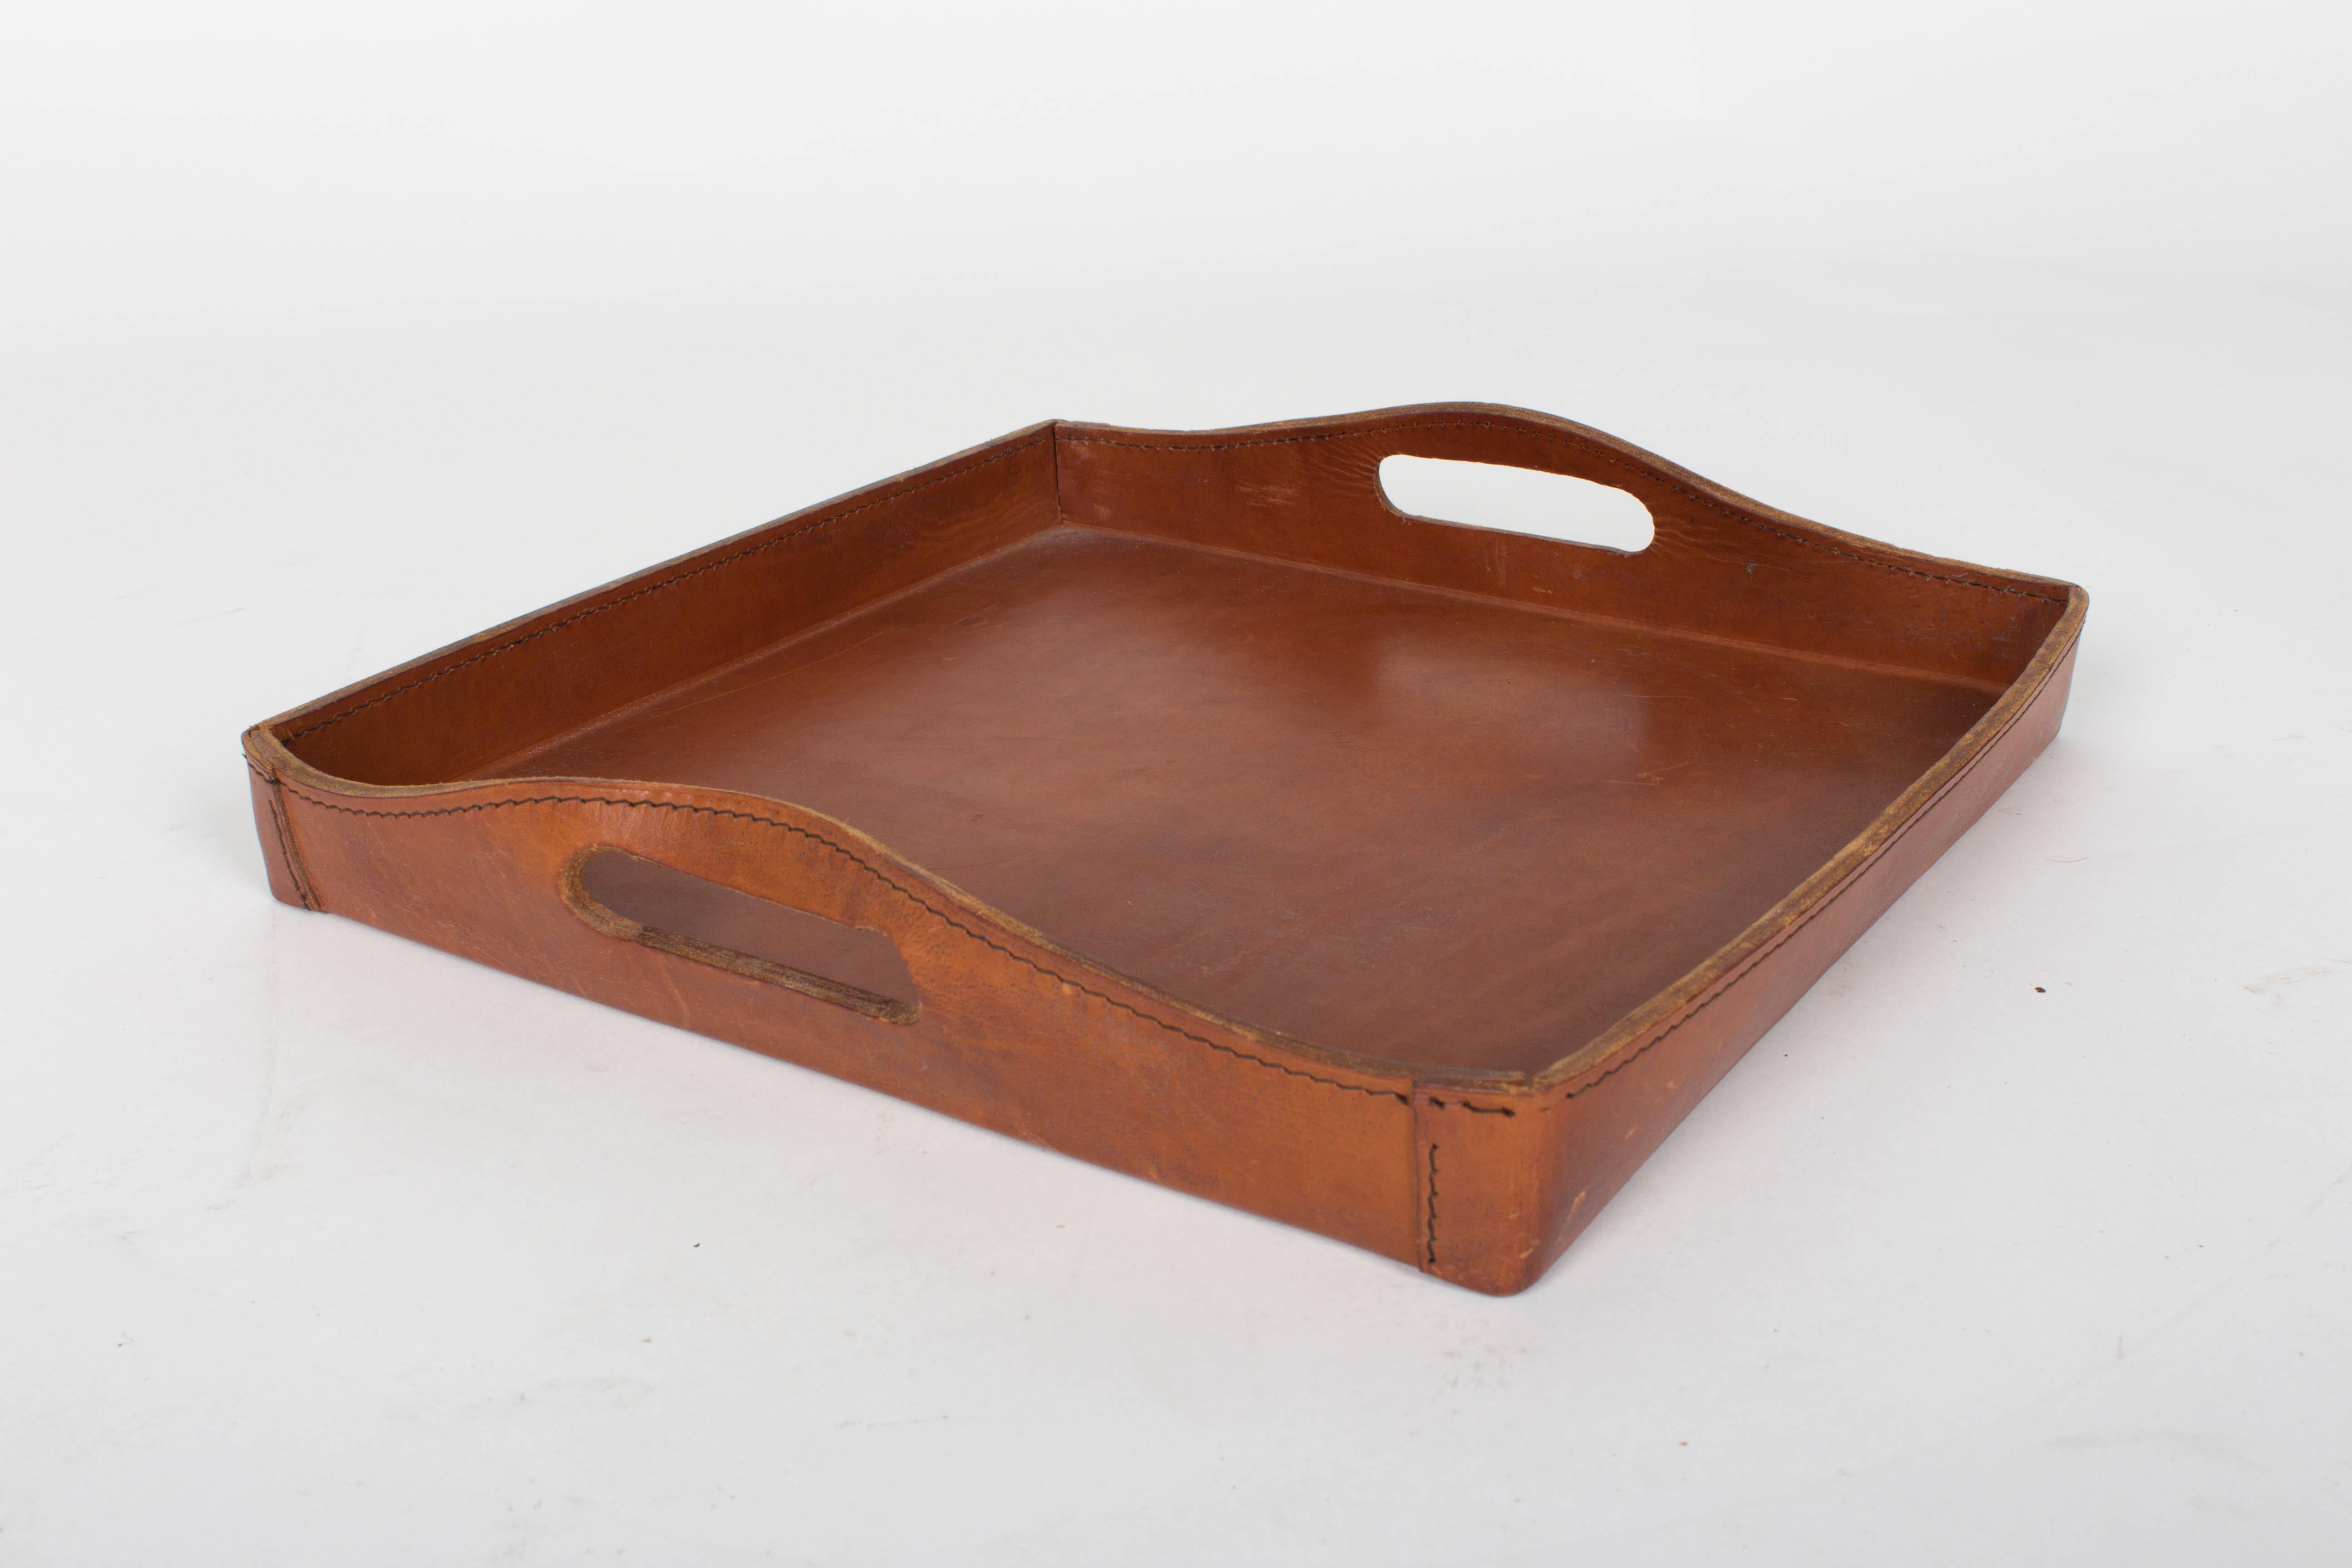 Rare Large and Thick Leather Serving Tray by the Auböck Workshop, Vienna, 1950s For Sale 2